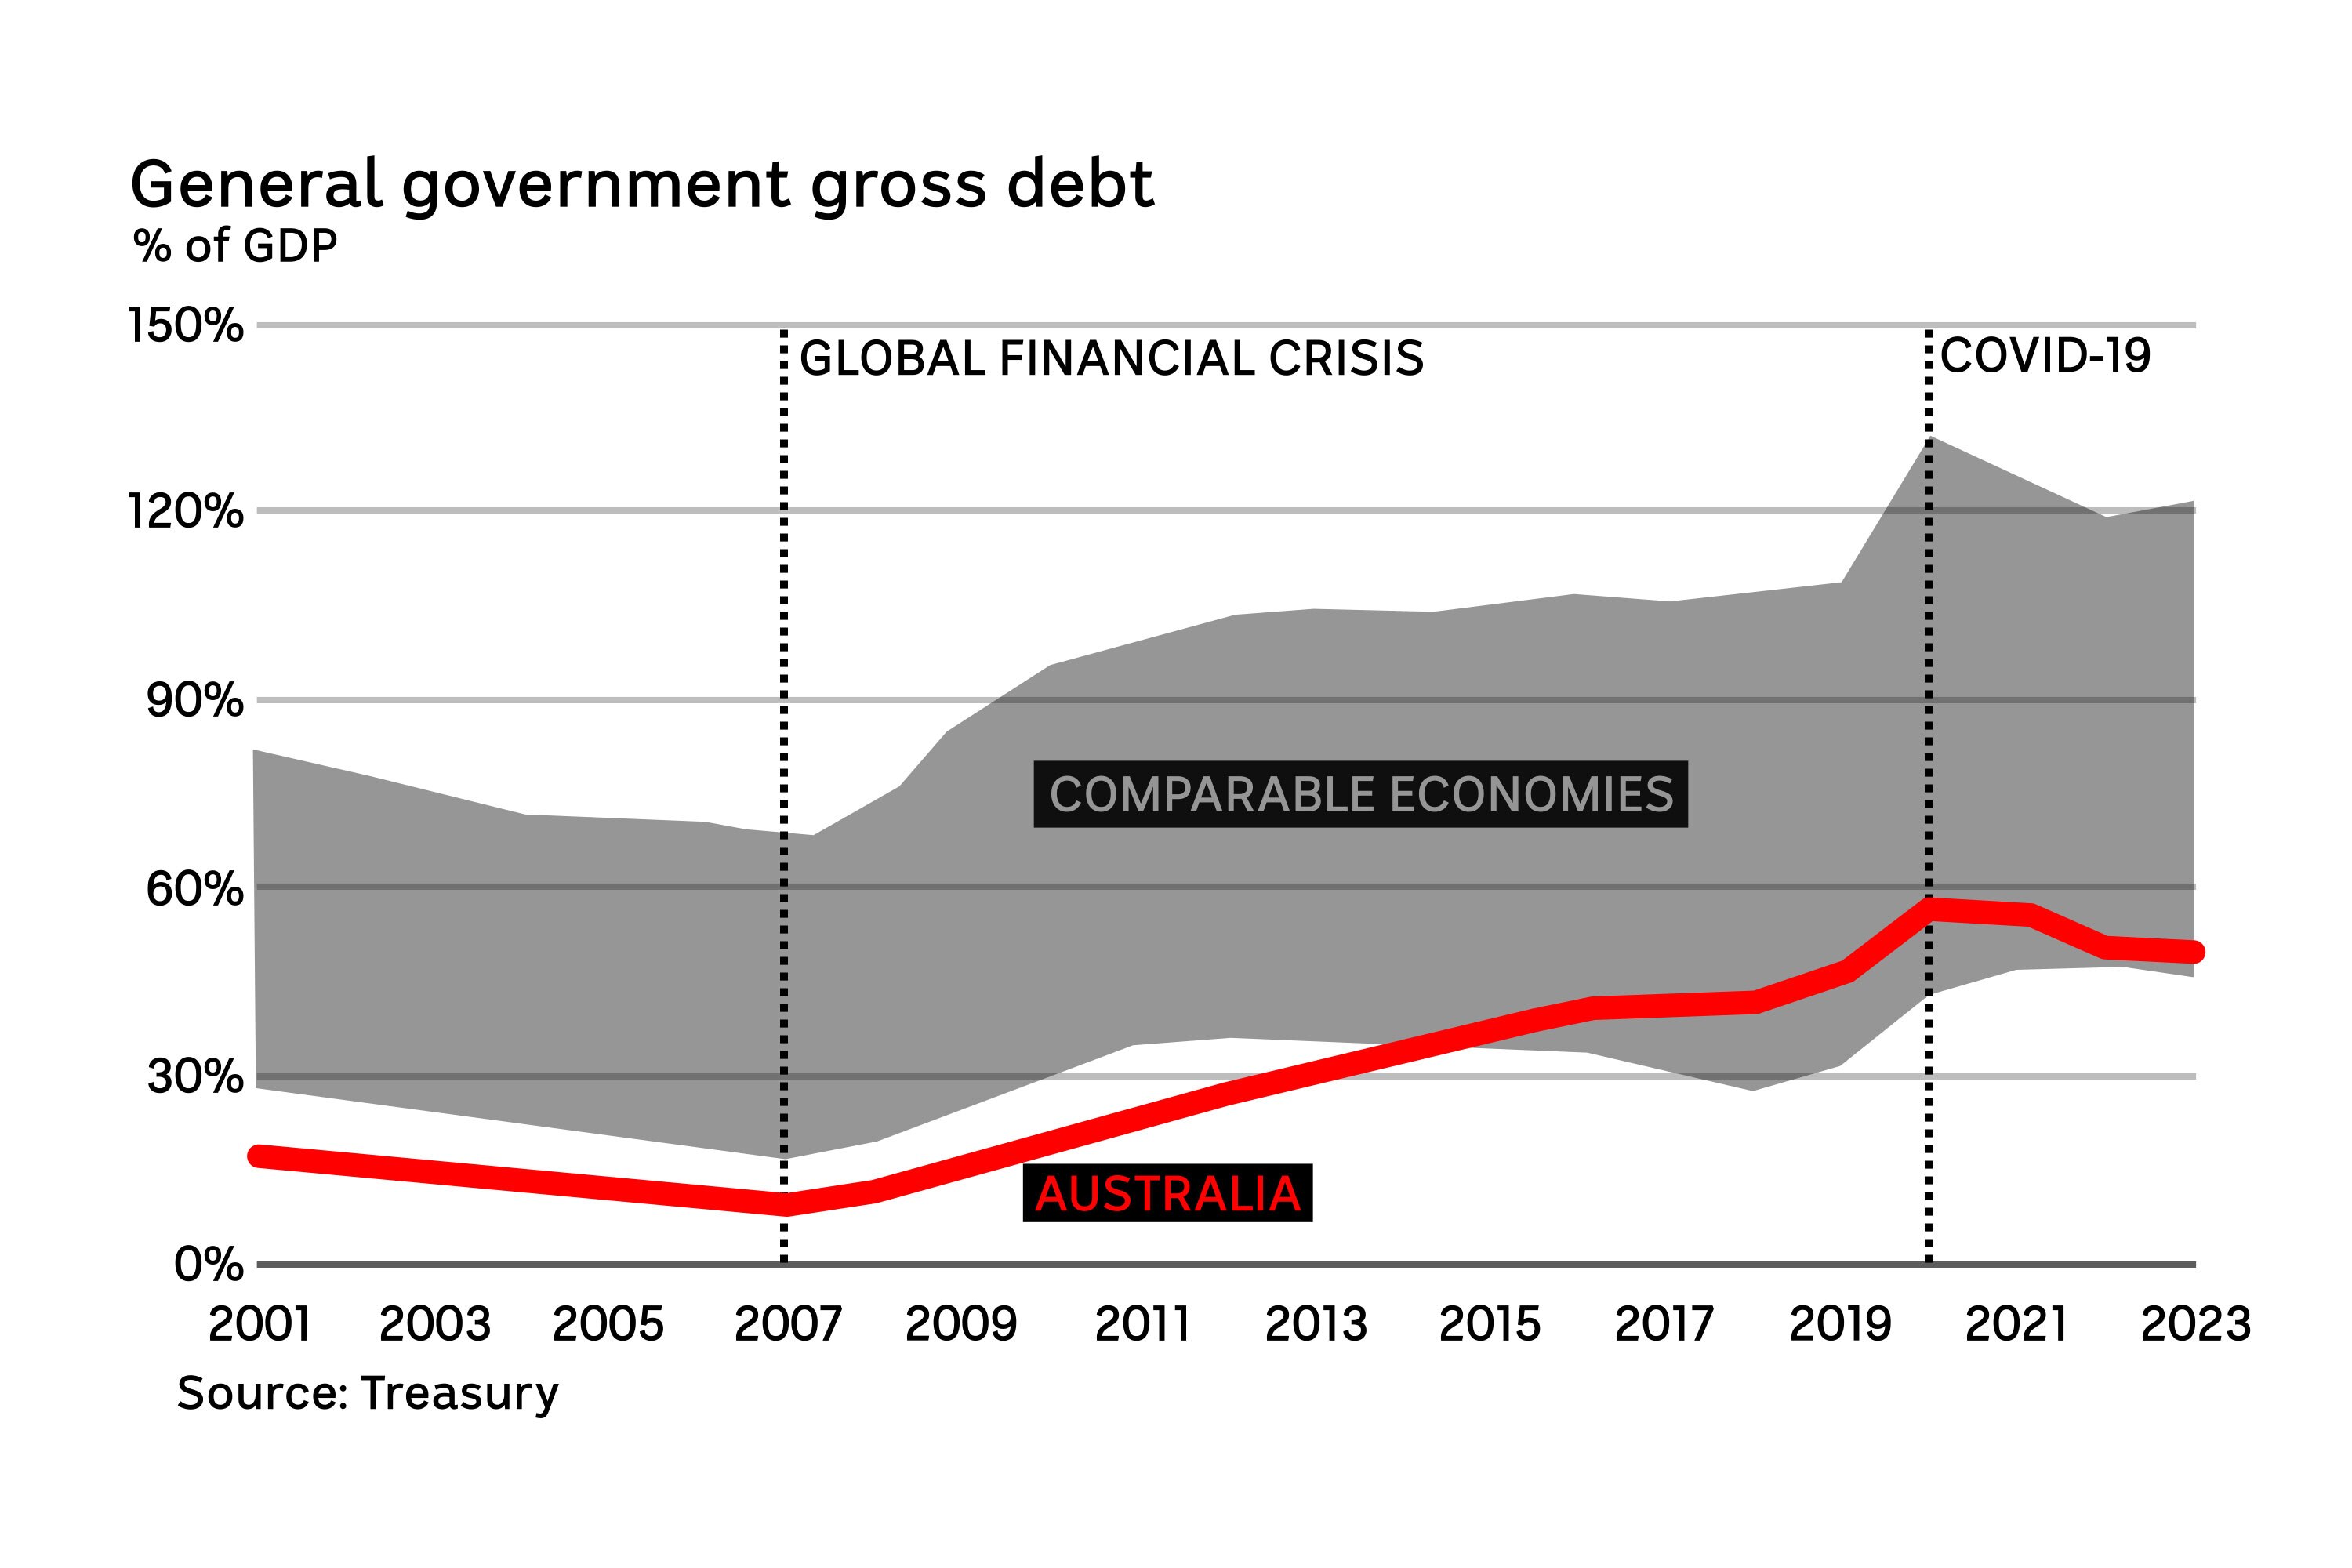 Australia's gross public debt levels (across federal state and local governments) are much lower than similar countries.